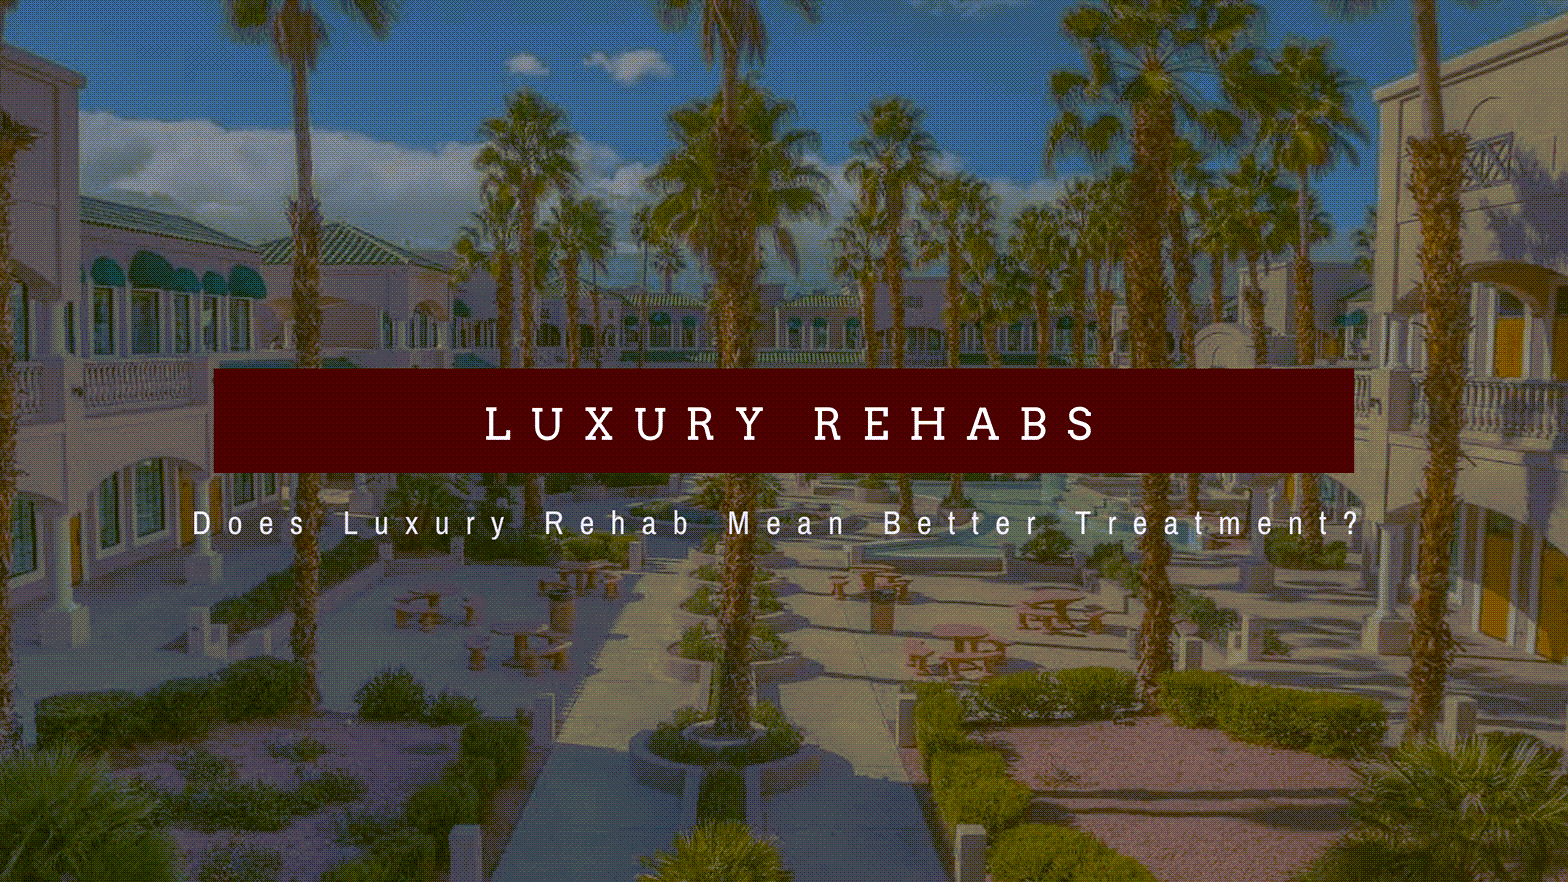 aerial view of large elaborate rehab facility asking does luxury rehab mean better treatment